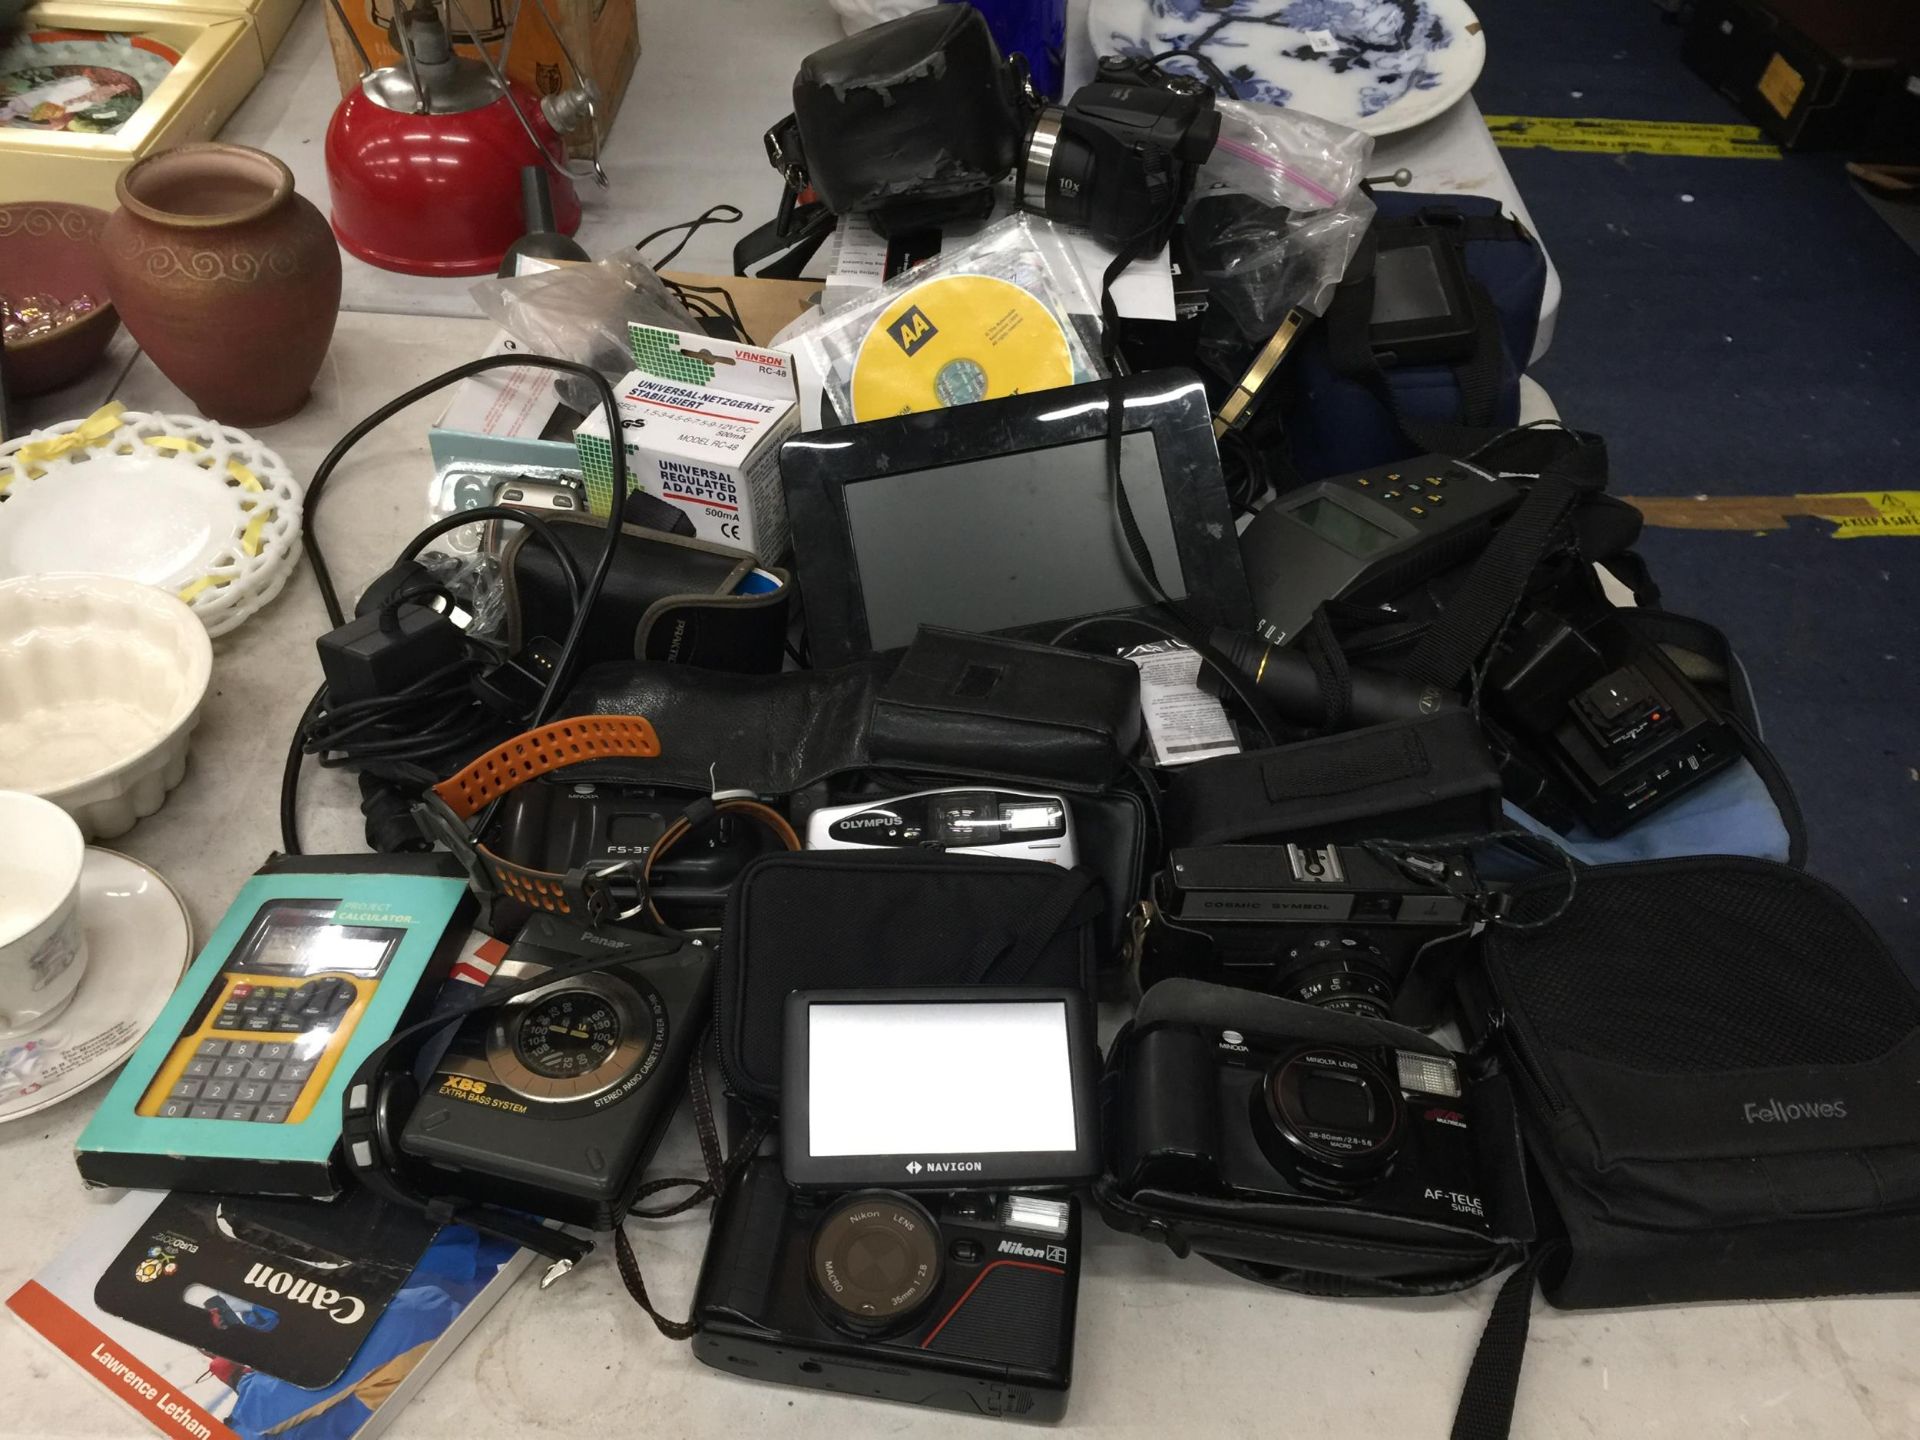 A LARGE COLLECTION OF CAMERAS TO INCLUDE COSMIC SYMBOL, FUJIFILM S5800, NIKON ETC